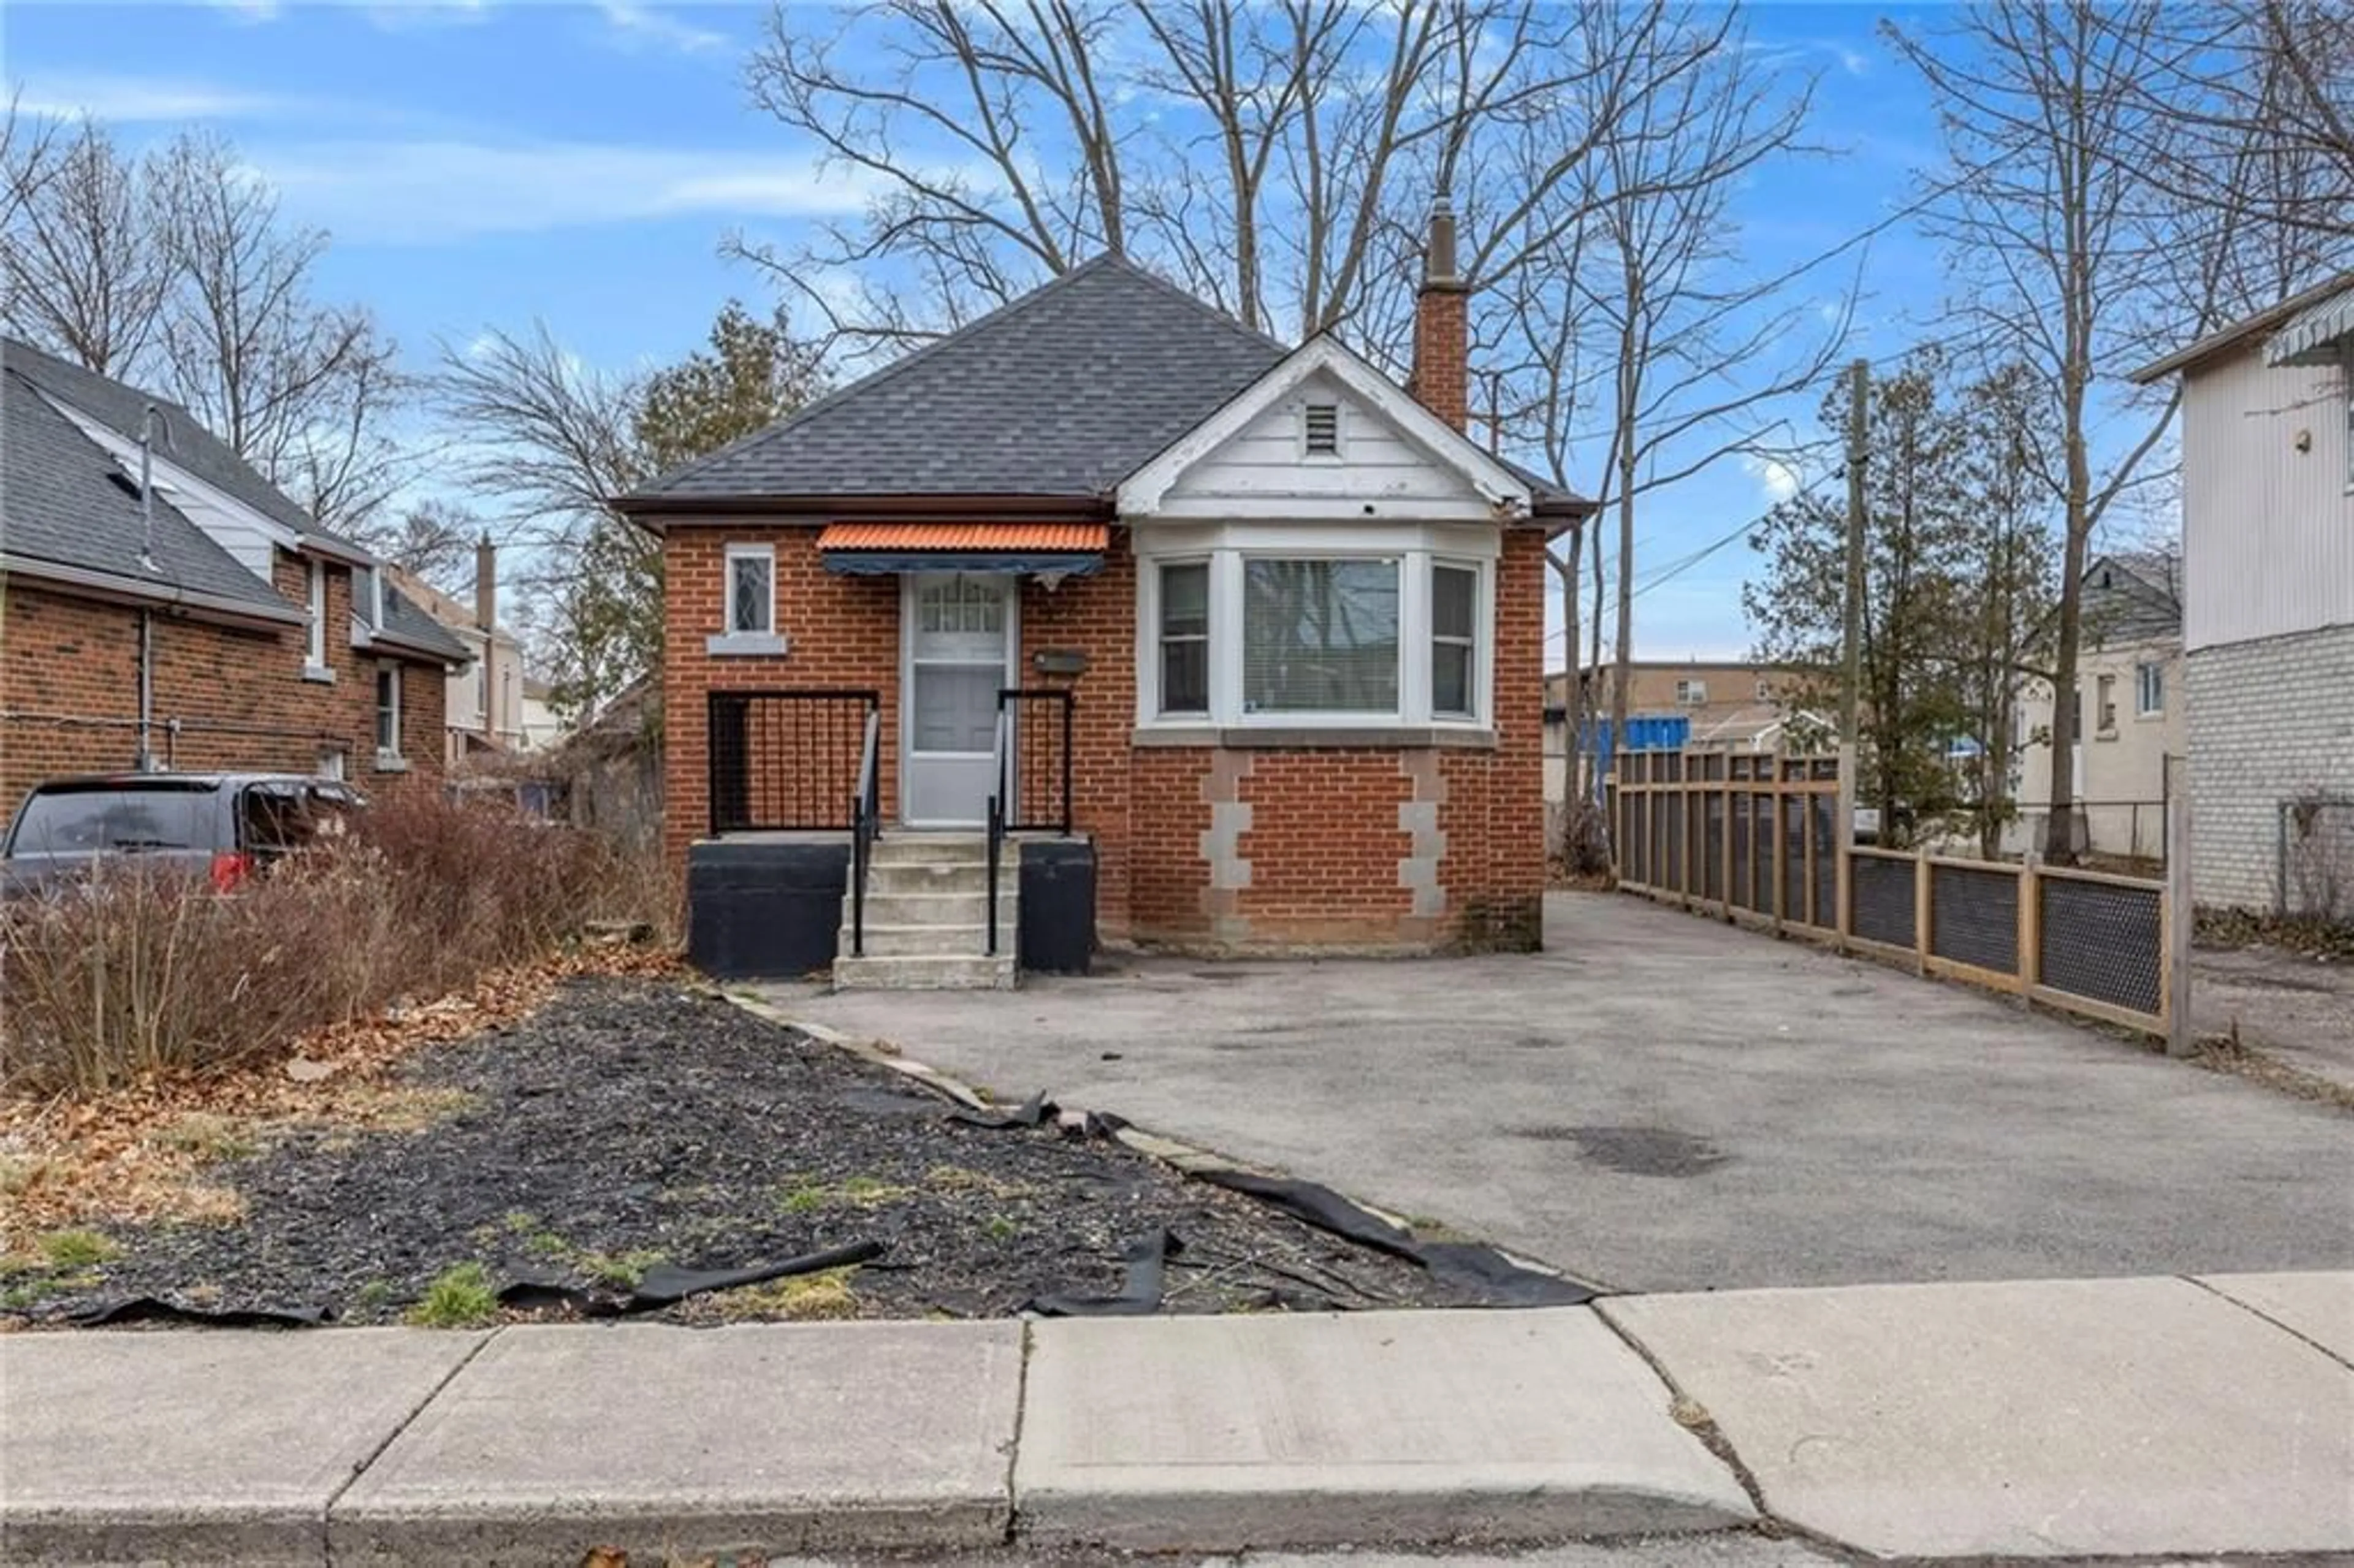 Frontside or backside of a home for 12 Hollywood St, Hamilton Ontario L8S 3B1